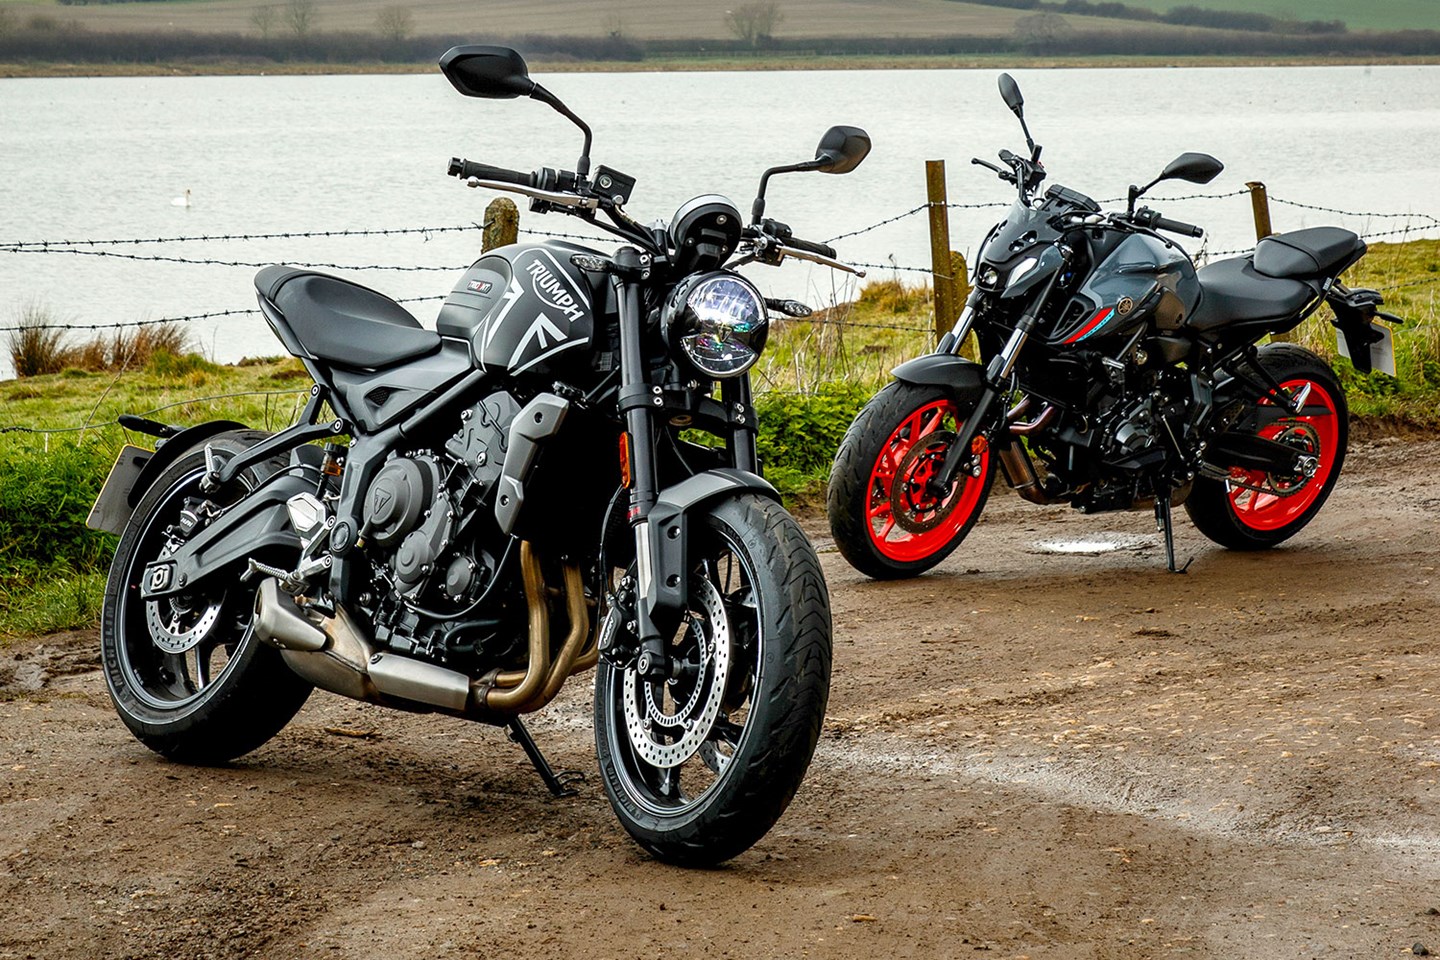 2020 Yamaha MT-07 First Ride Review - Outsiders Republic